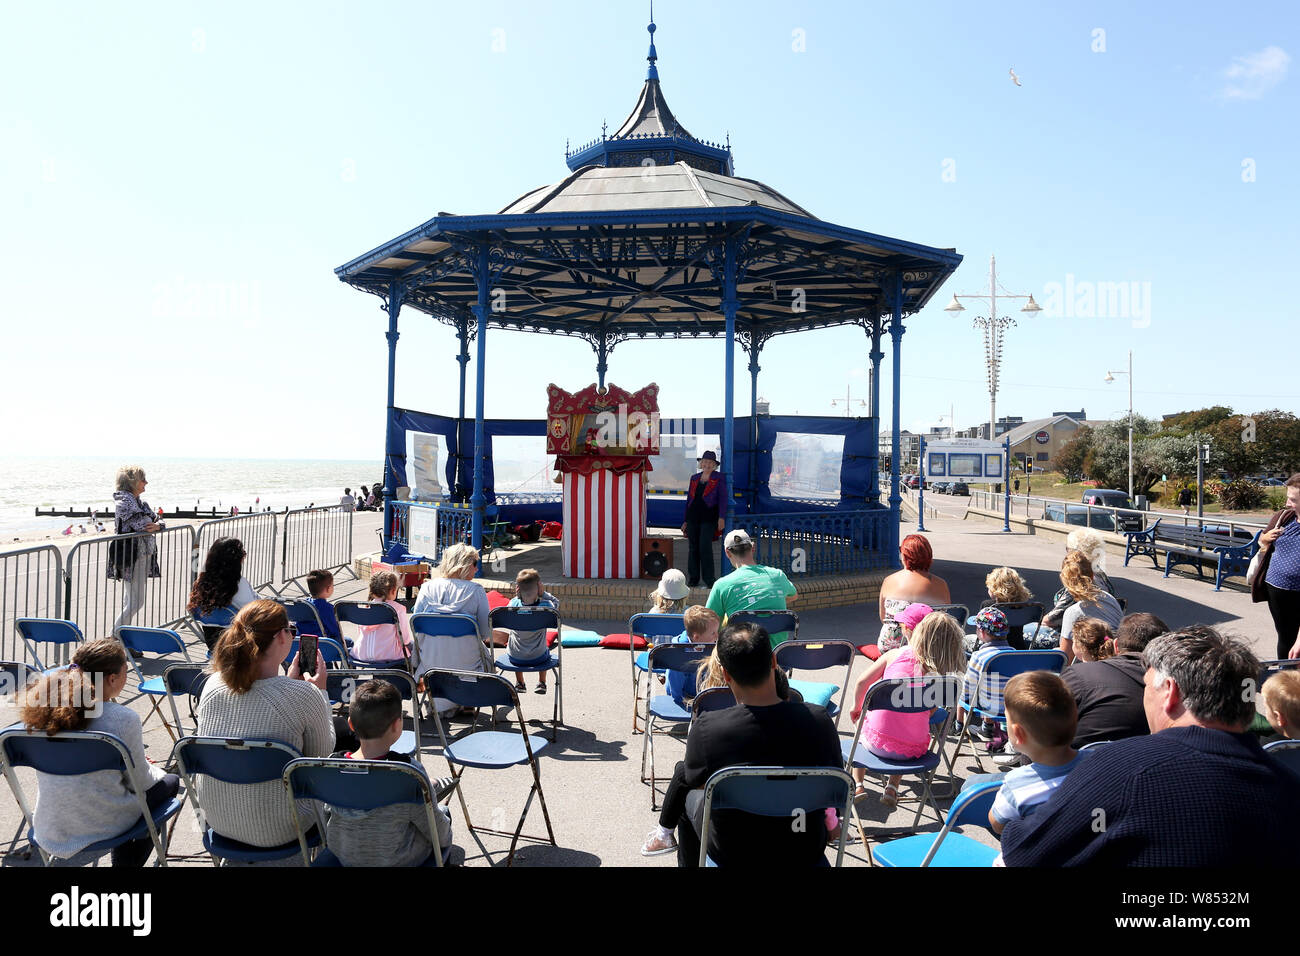 Punch and Judy show on Bognor Regis seafront, West Sussex, UK. Stock Photo